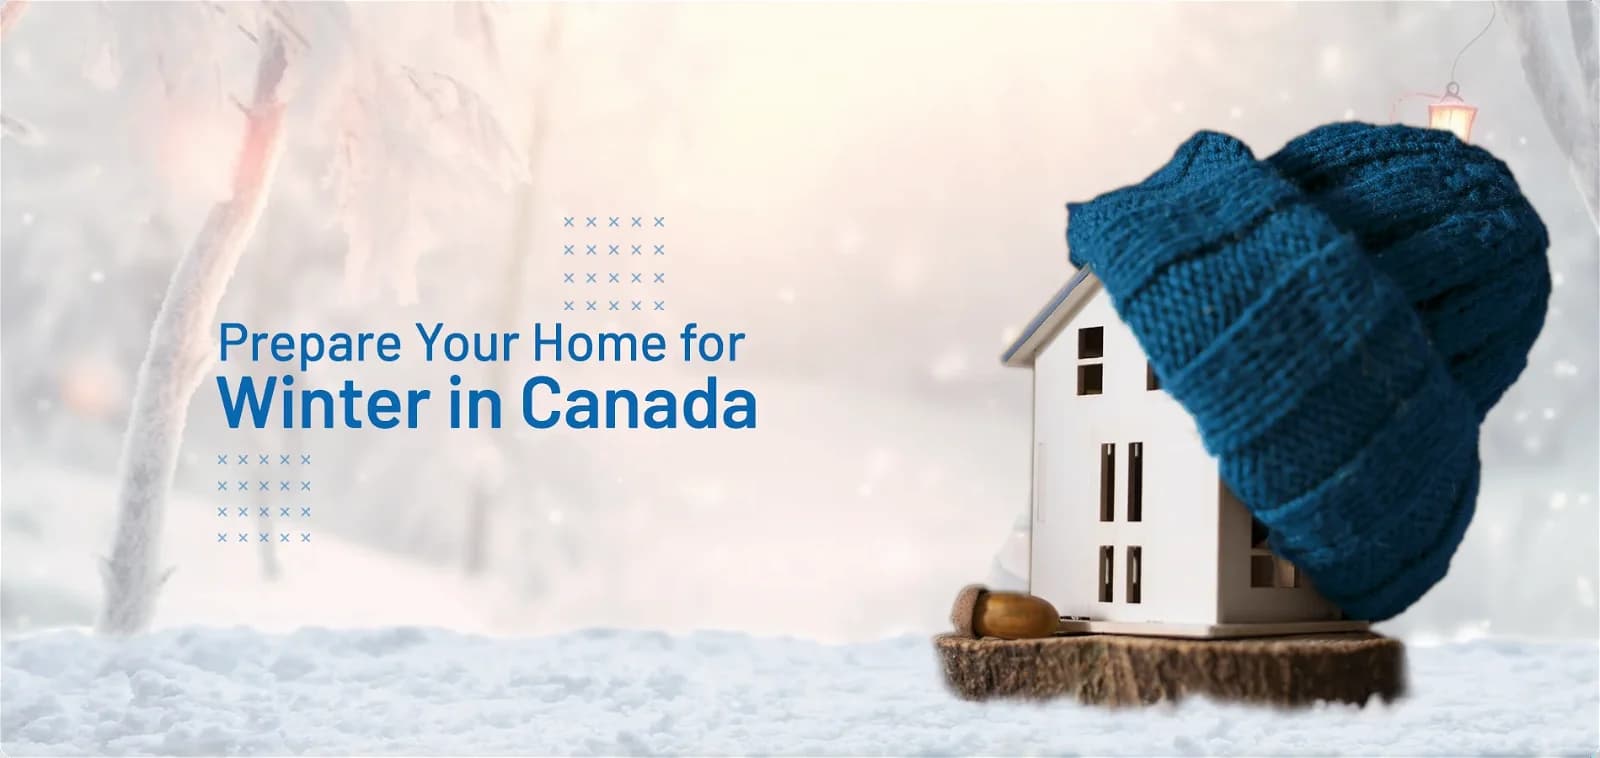 It’s Time To Prepare Your House for Winter in Canada